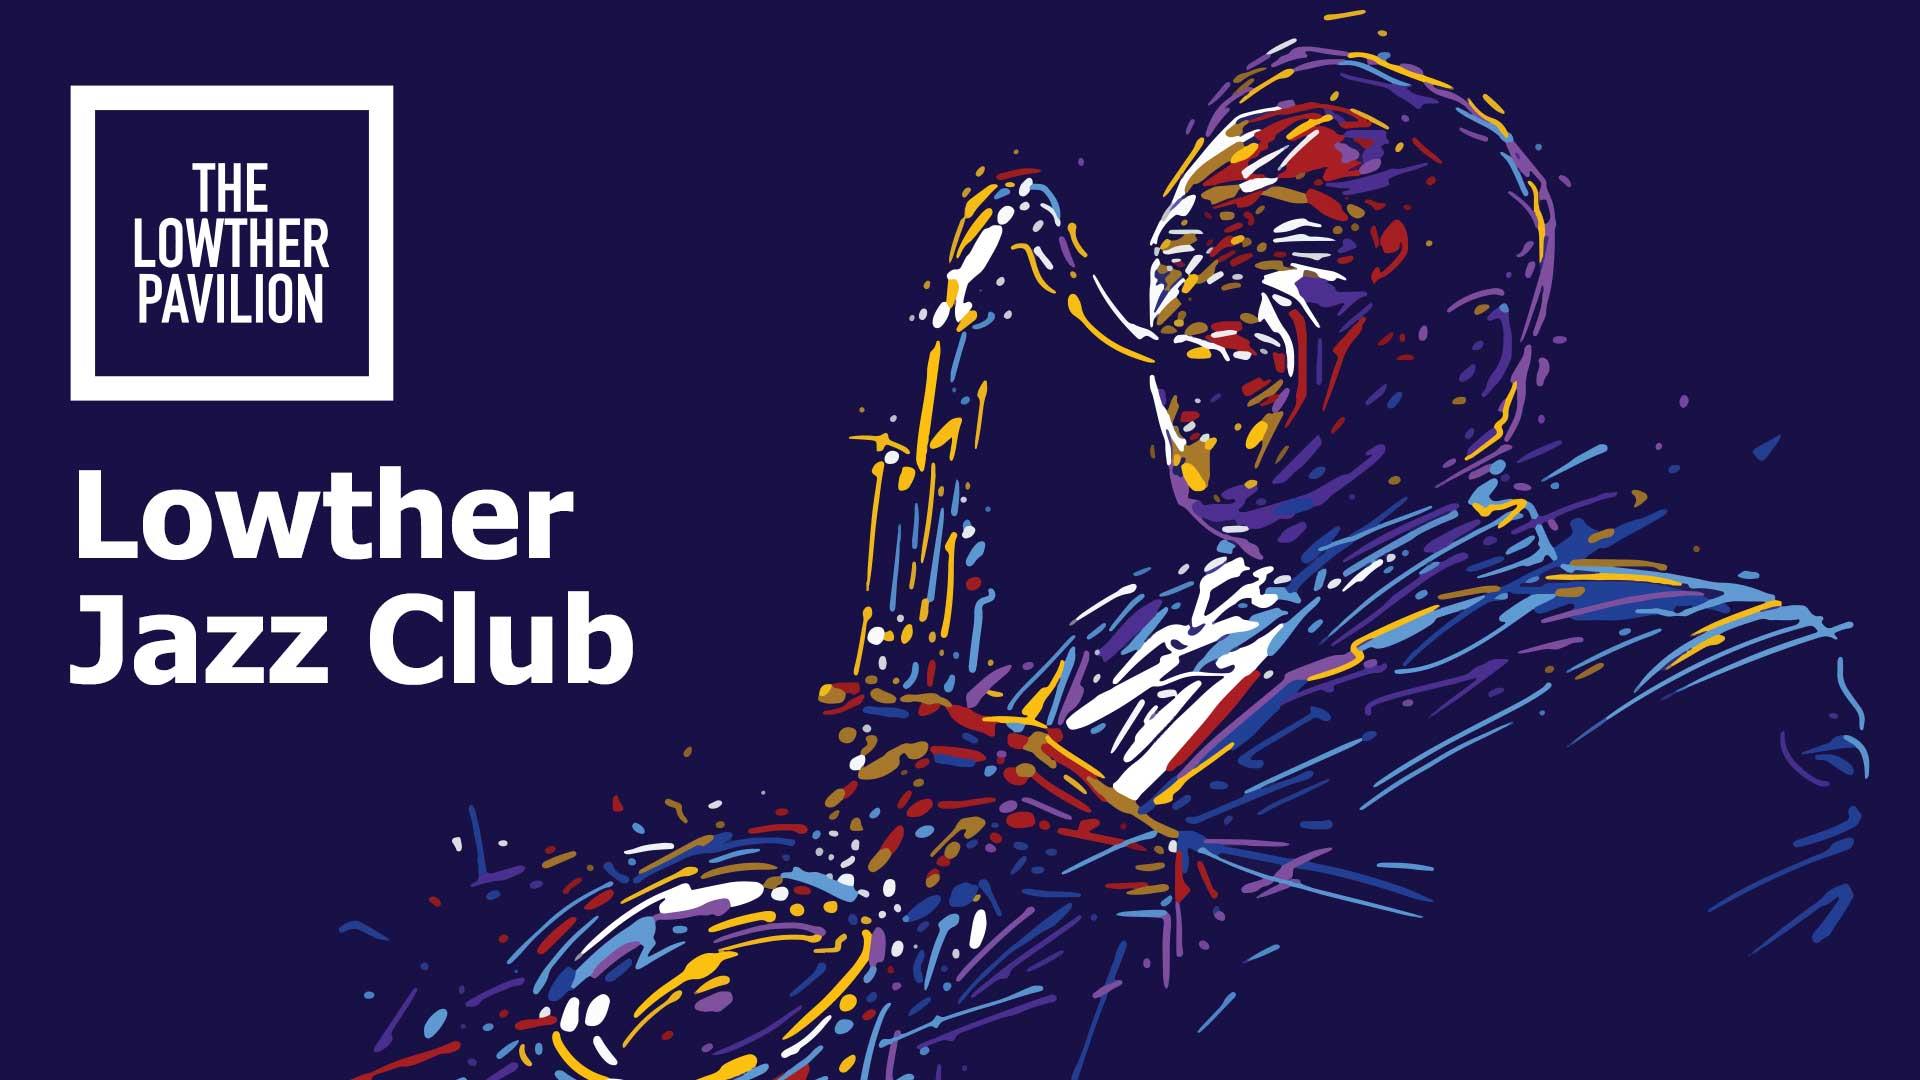 Lowther Jazz Club – May 2022 - Lowther Pavilion